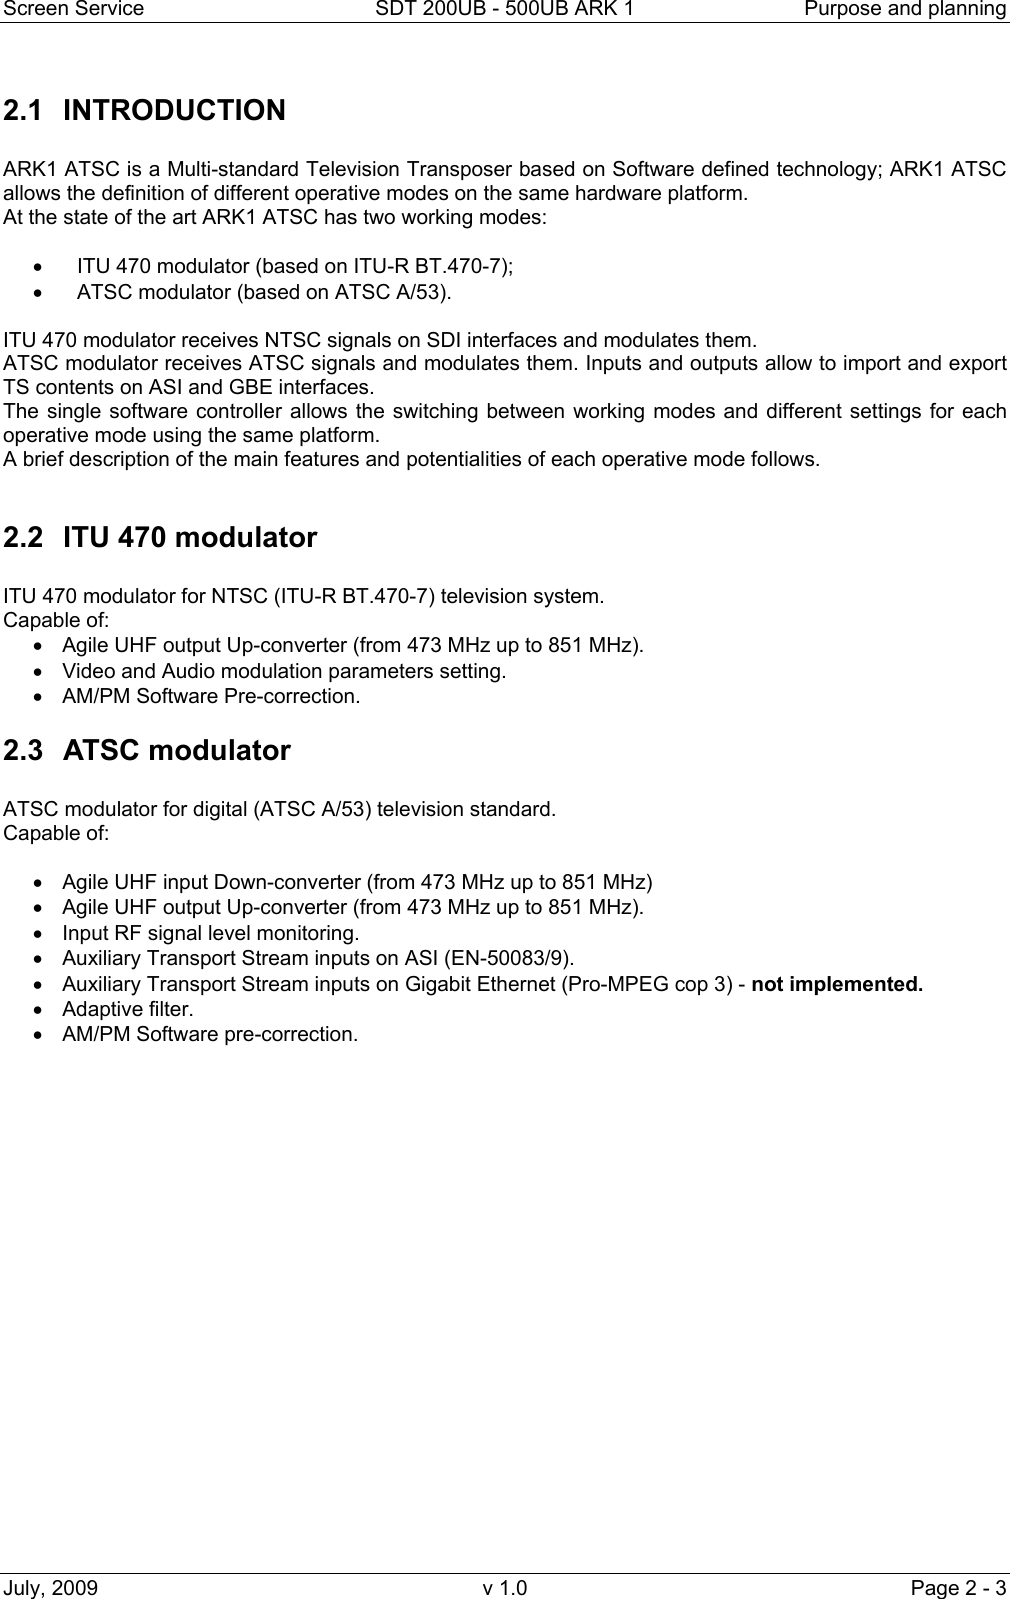 Screen Service  SDT 200UB - 500UB ARK 1  Purpose and planning July, 2009  v 1.0  Page 2 - 3 2.1 INTRODUCTION  ARK1 ATSC is a Multi-standard Television Transposer based on Software defined technology; ARK1 ATSC allows the definition of different operative modes on the same hardware platform. At the state of the art ARK1 ATSC has two working modes:  •  ITU 470 modulator (based on ITU-R BT.470-7); •  ATSC modulator (based on ATSC A/53).  ITU 470 modulator receives NTSC signals on SDI interfaces and modulates them. ATSC modulator receives ATSC signals and modulates them. Inputs and outputs allow to import and export TS contents on ASI and GBE interfaces. The single software controller allows the switching between working modes and different settings for each operative mode using the same platform. A brief description of the main features and potentialities of each operative mode follows.  2.2  ITU 470 modulator  ITU 470 modulator for NTSC (ITU-R BT.470-7) television system. Capable of: •  Agile UHF output Up-converter (from 473 MHz up to 851 MHz). •  Video and Audio modulation parameters setting. •  AM/PM Software Pre-correction. 2.3 ATSC modulator  ATSC modulator for digital (ATSC A/53) television standard. Capable of:  •  Agile UHF input Down-converter (from 473 MHz up to 851 MHz)  •  Agile UHF output Up-converter (from 473 MHz up to 851 MHz). •  Input RF signal level monitoring. •  Auxiliary Transport Stream inputs on ASI (EN-50083/9). •  Auxiliary Transport Stream inputs on Gigabit Ethernet (Pro-MPEG cop 3) - not implemented. • Adaptive filter. •  AM/PM Software pre-correction.                    